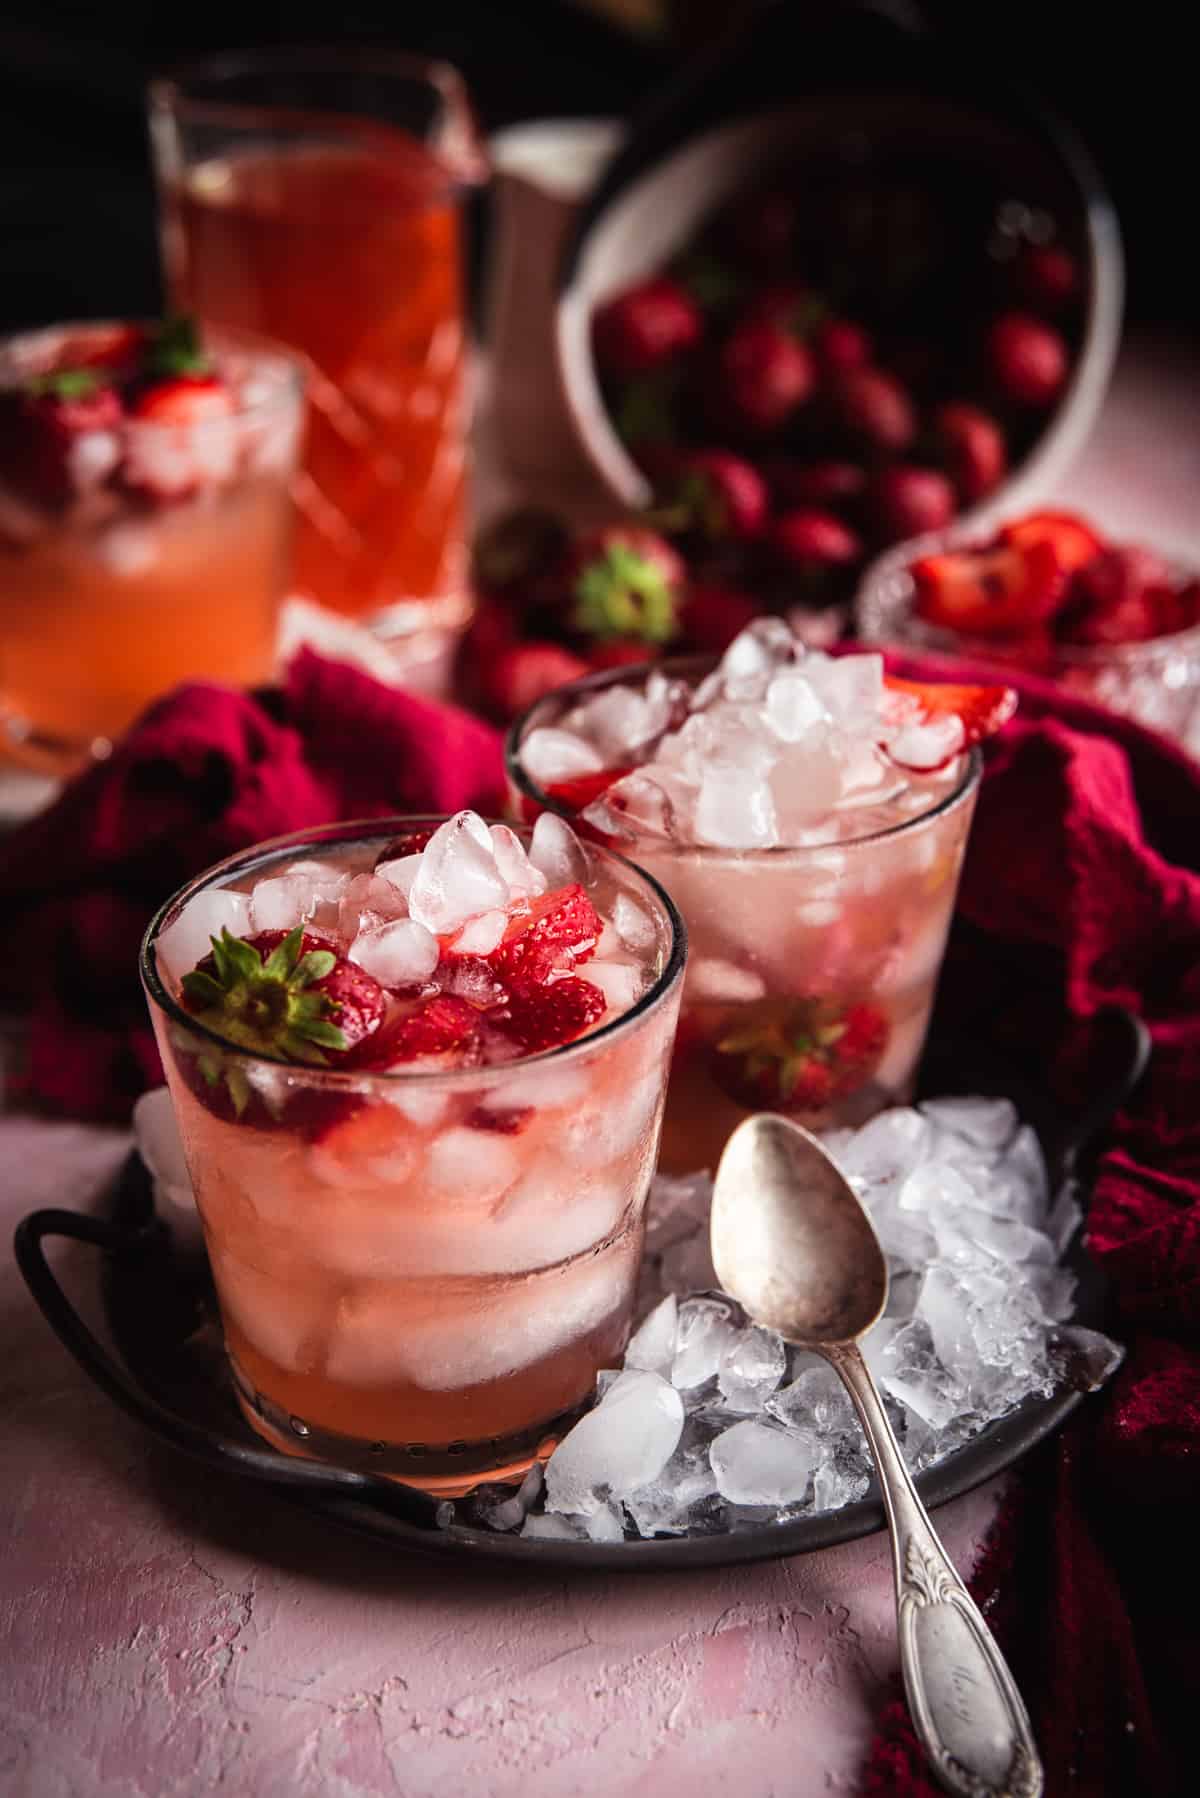 two glasses with ice and pink sangria on a circlular metal serving dish covered in crushed ice and vintage spoon on top.  Pitcher of sangria and bowl of strawberries in the background